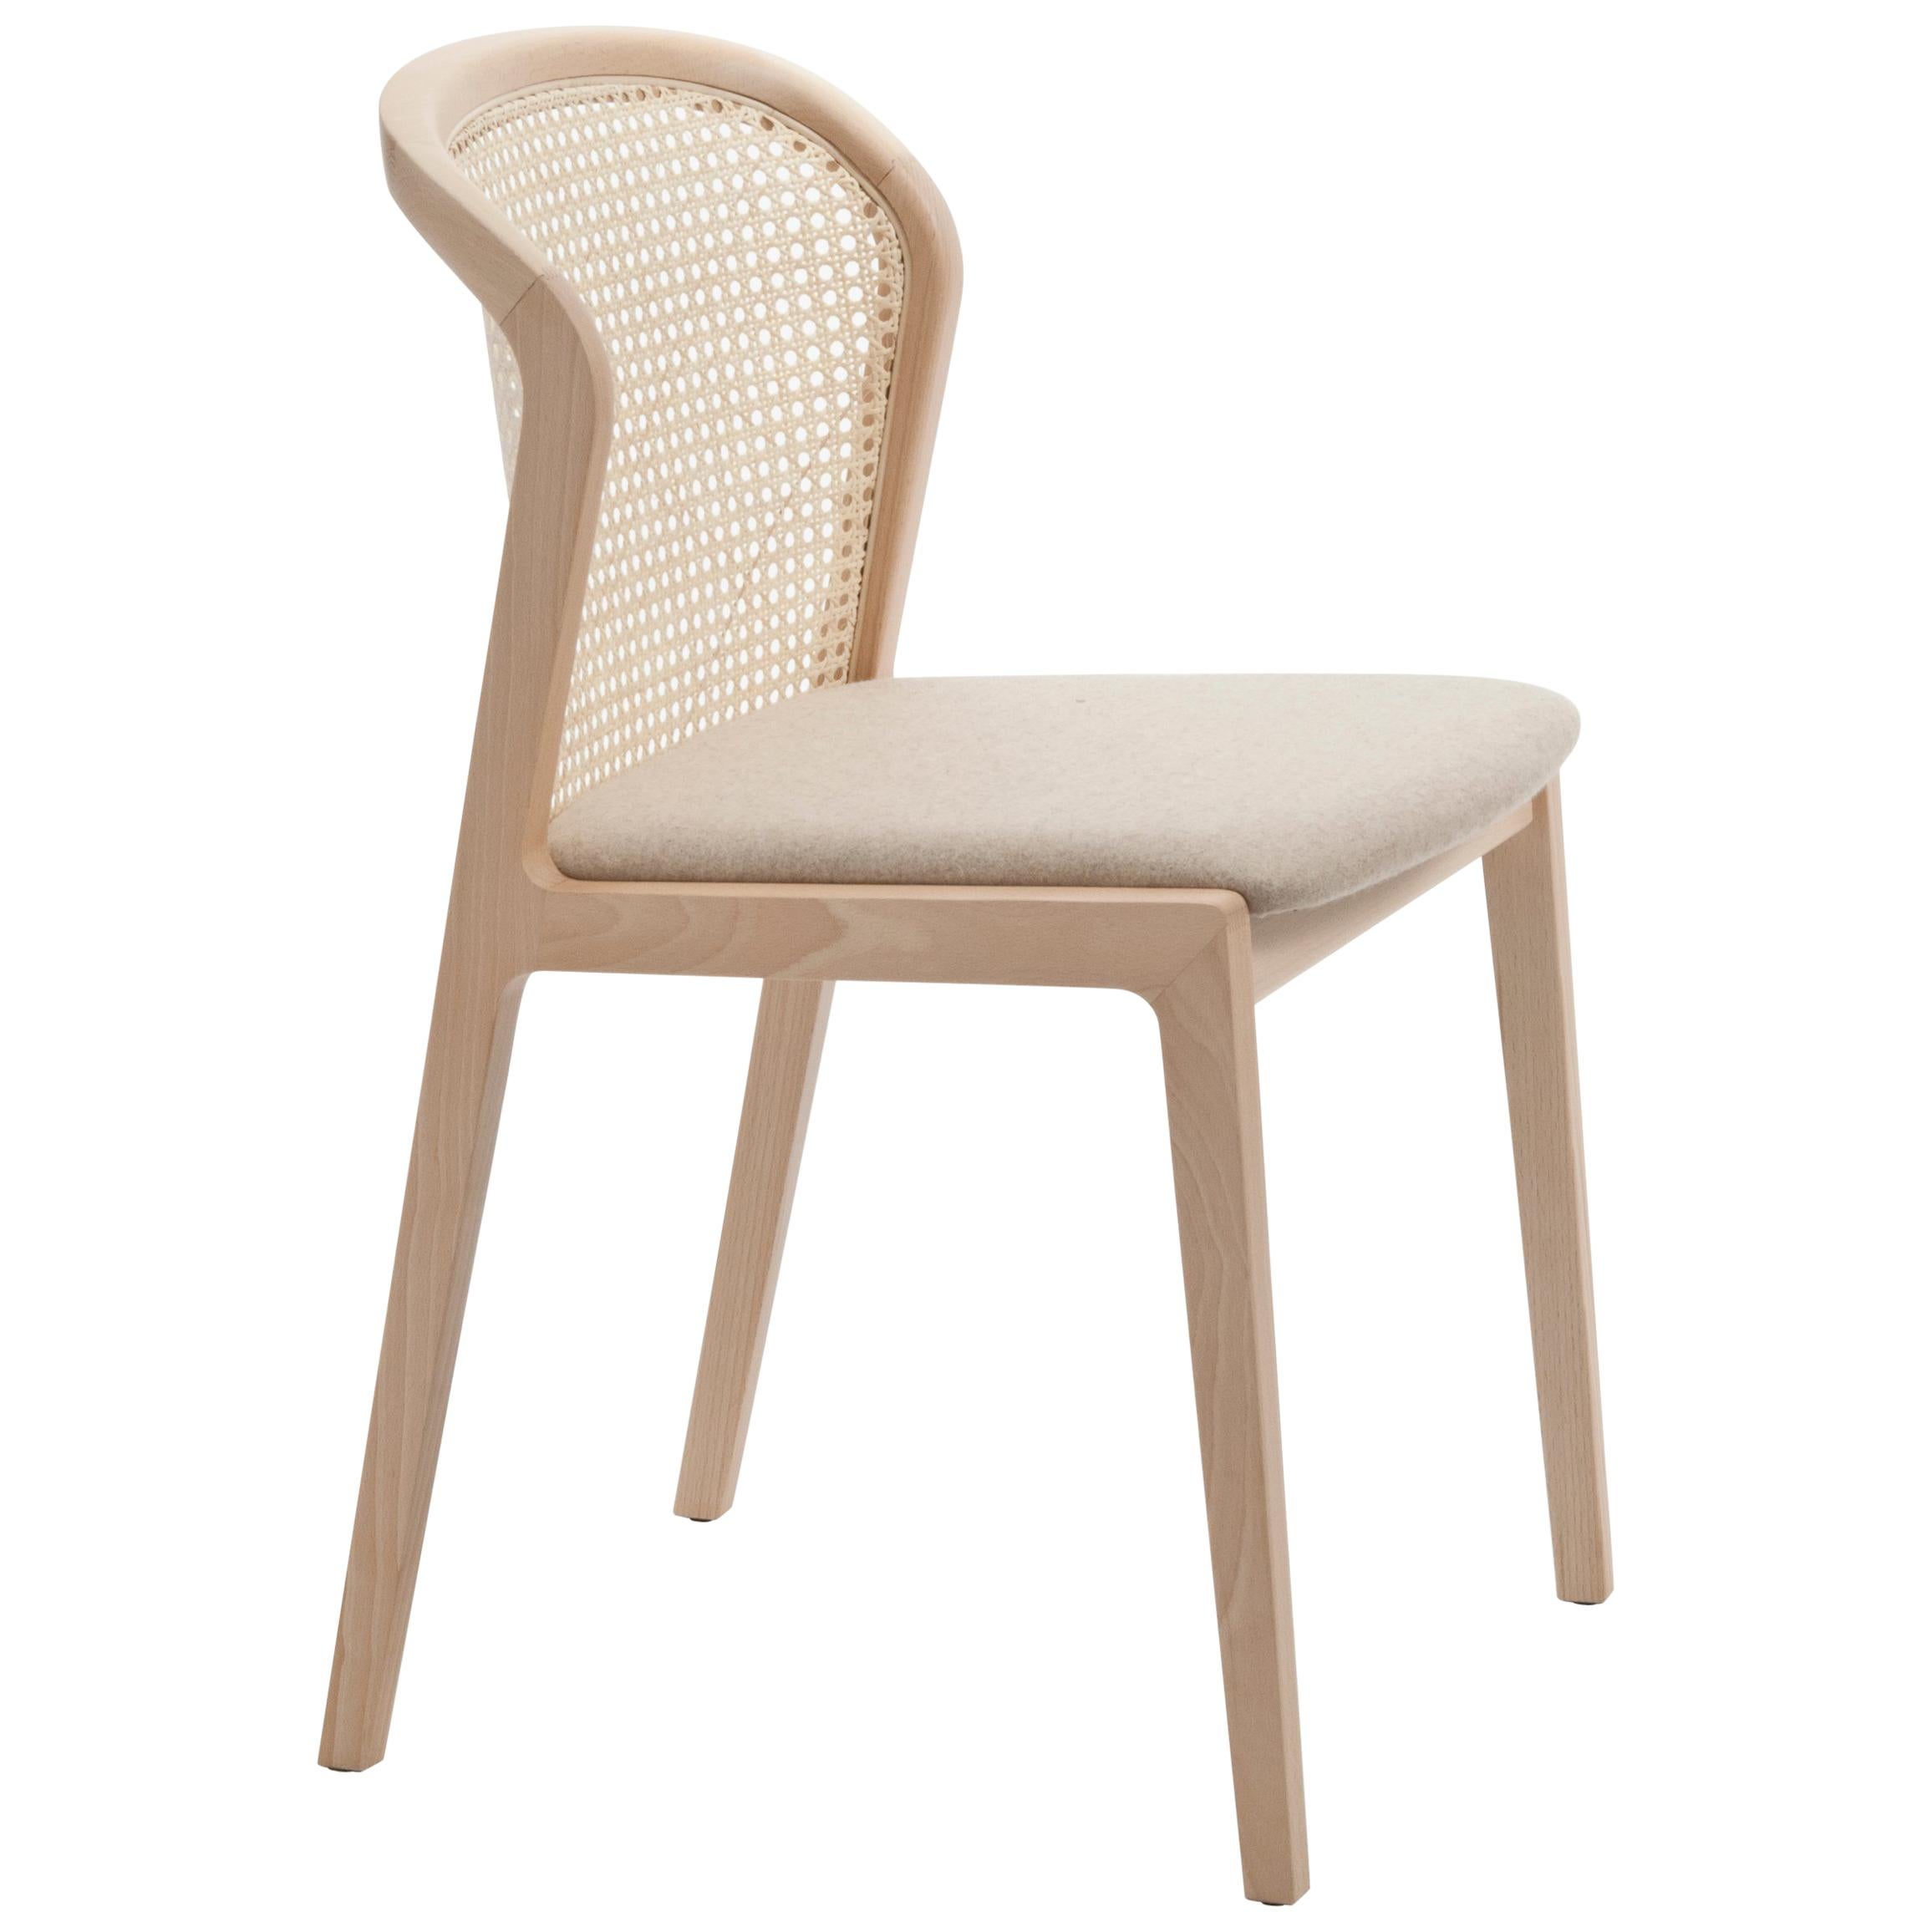 Italian Vienna Chair by Colé, Modern Design in Wood and Straw, Blue Upholstered Seat For Sale